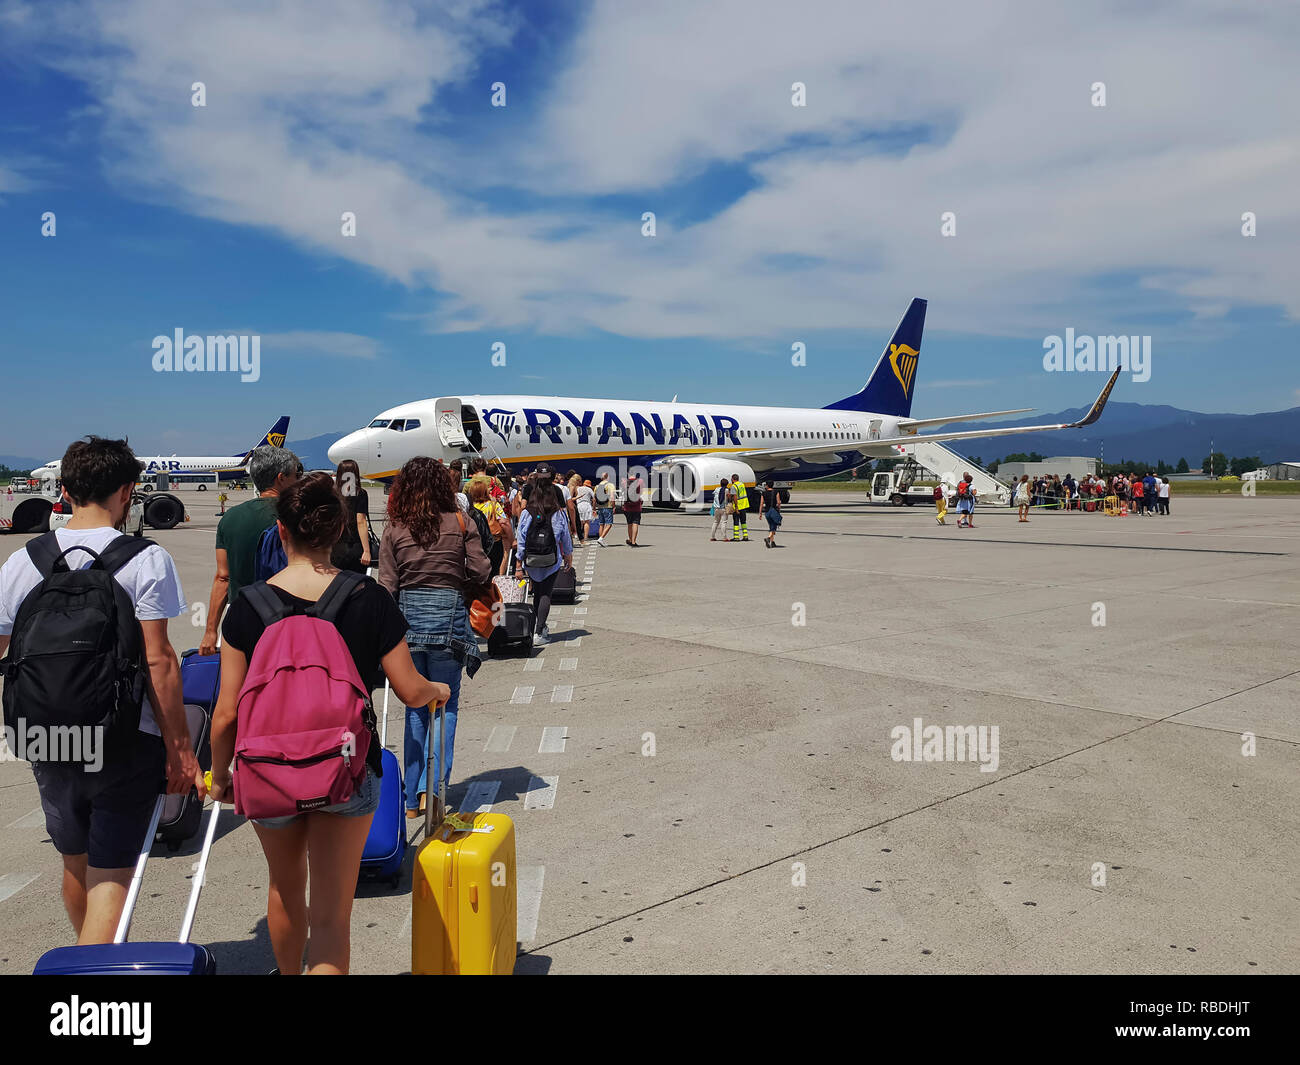 Passengers walking on tarmac of Milan Bergamo Airport. Travelers with luggage at apron area of Orio al Serio airport ready to board a Ryanair aircraft Stock Photo